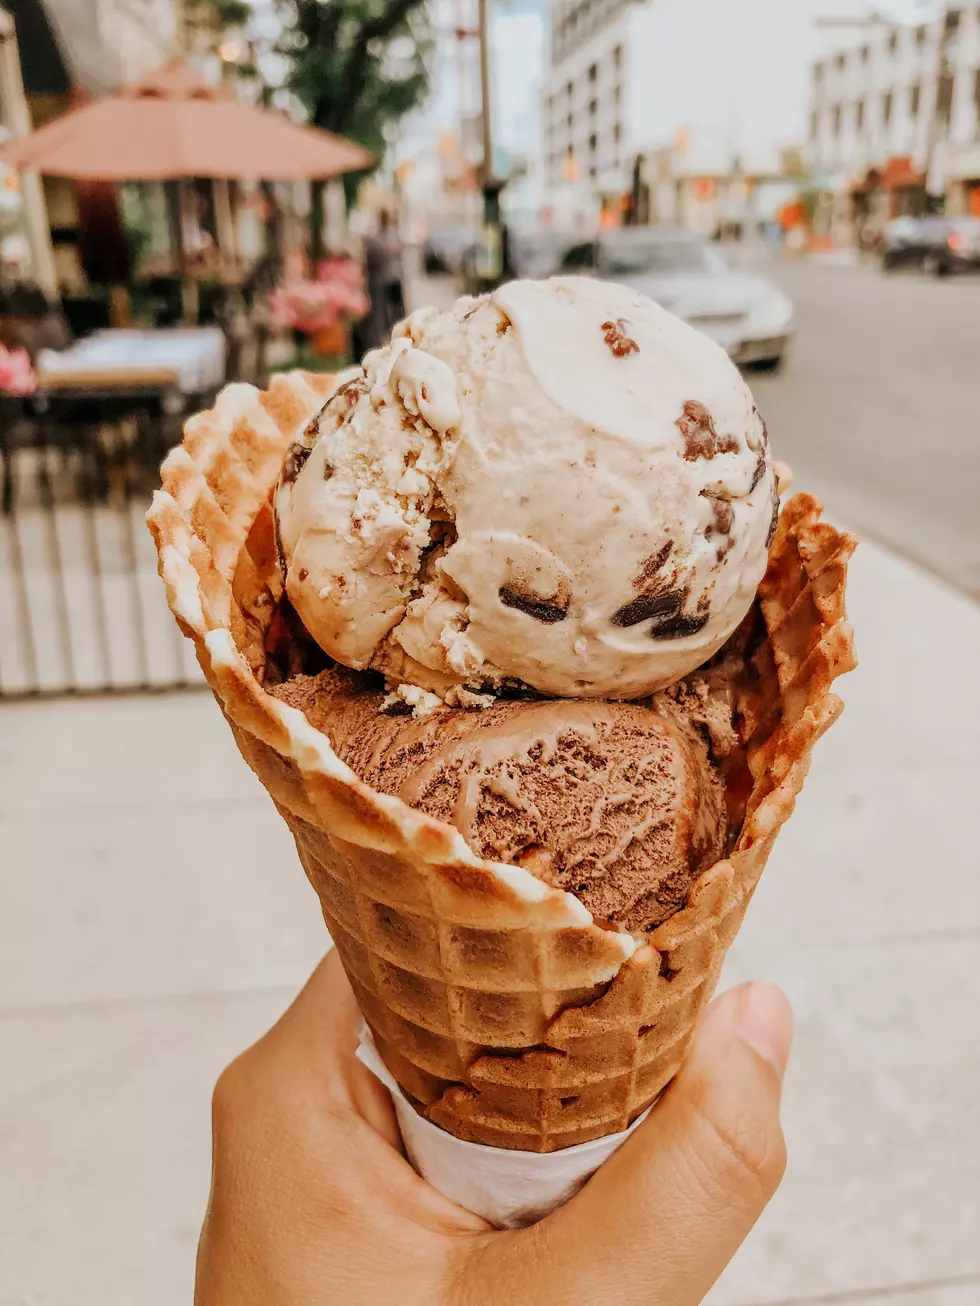 The Highest Rated Ice Cream Shops in Cedar Falls